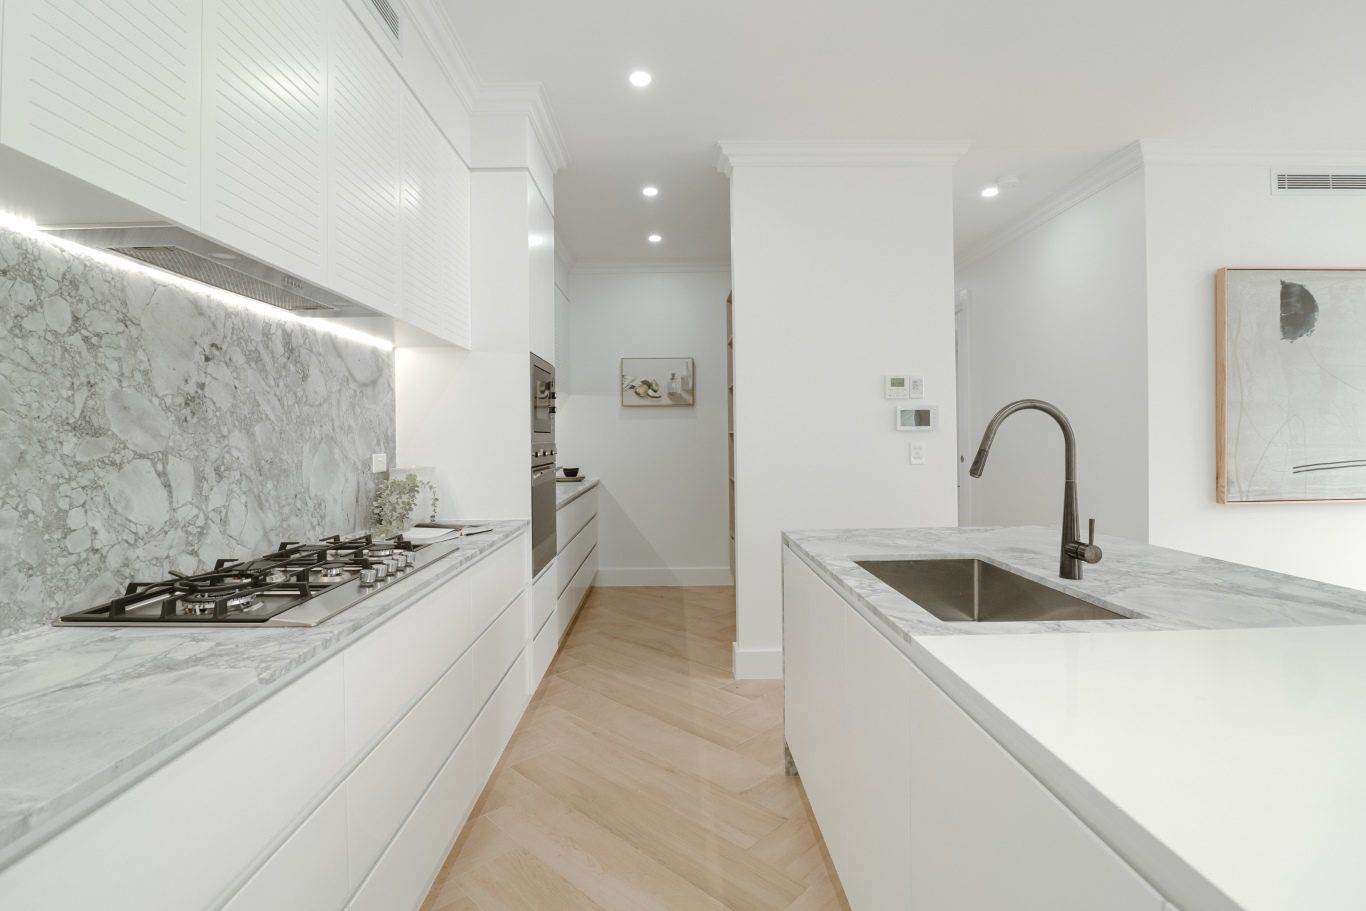 CARINGBAH SOUTH PROJECT show tile project